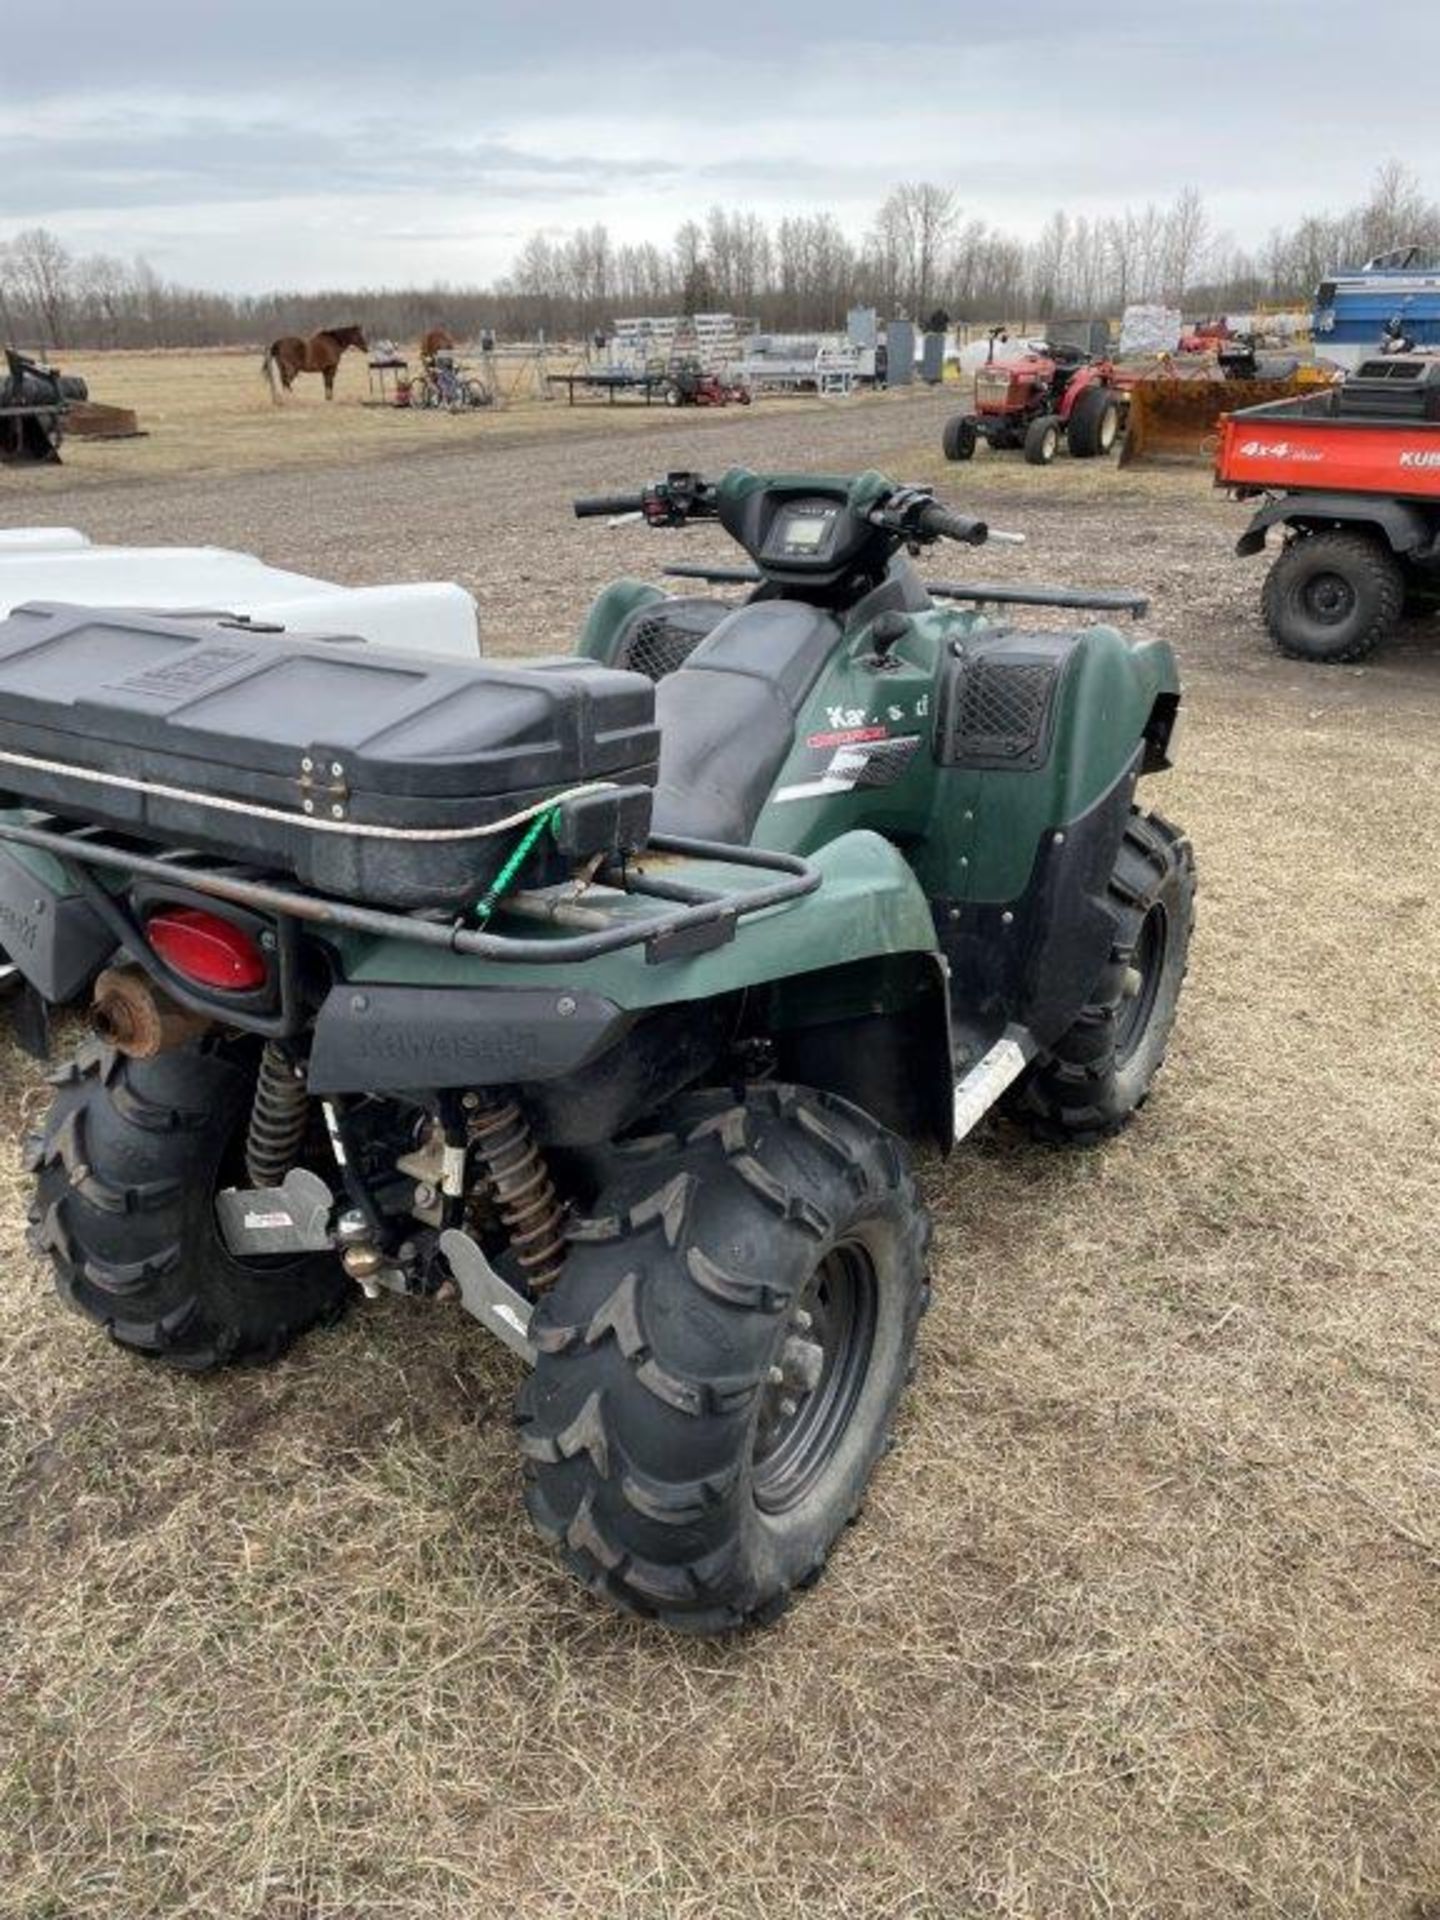 2007 KAWASAKI BRUTE FORCE 750 ATV 4X4 AUTO, RECENT CARB CLEAN, NEW BATTERY, 1762 KM'S SHOWING - Image 7 of 19